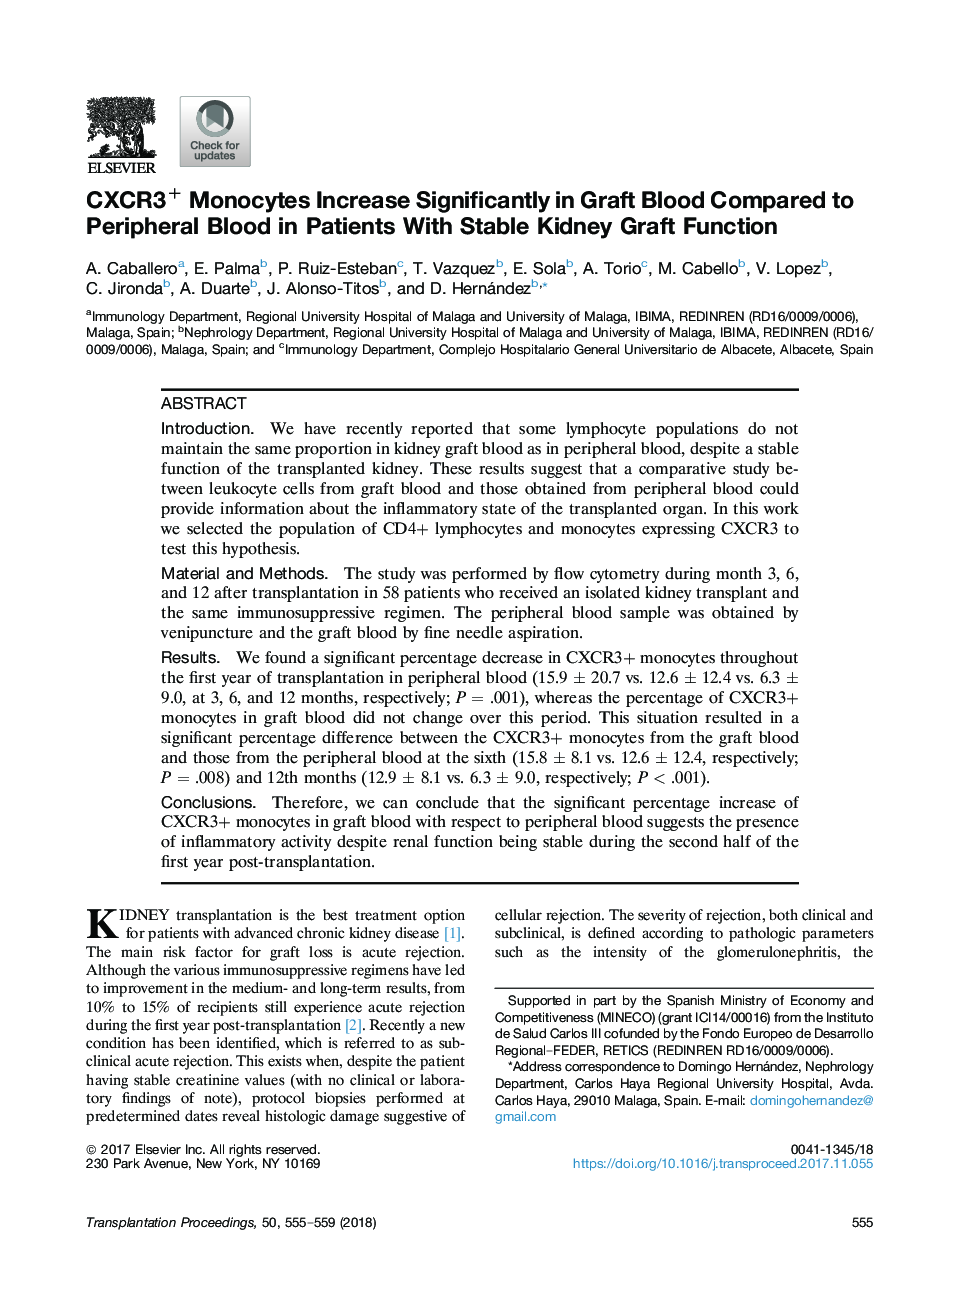 CXCR3+ Monocytes Increase Significantly in Graft Blood Compared to Peripheral Blood in Patients With Stable Kidney Graft Function